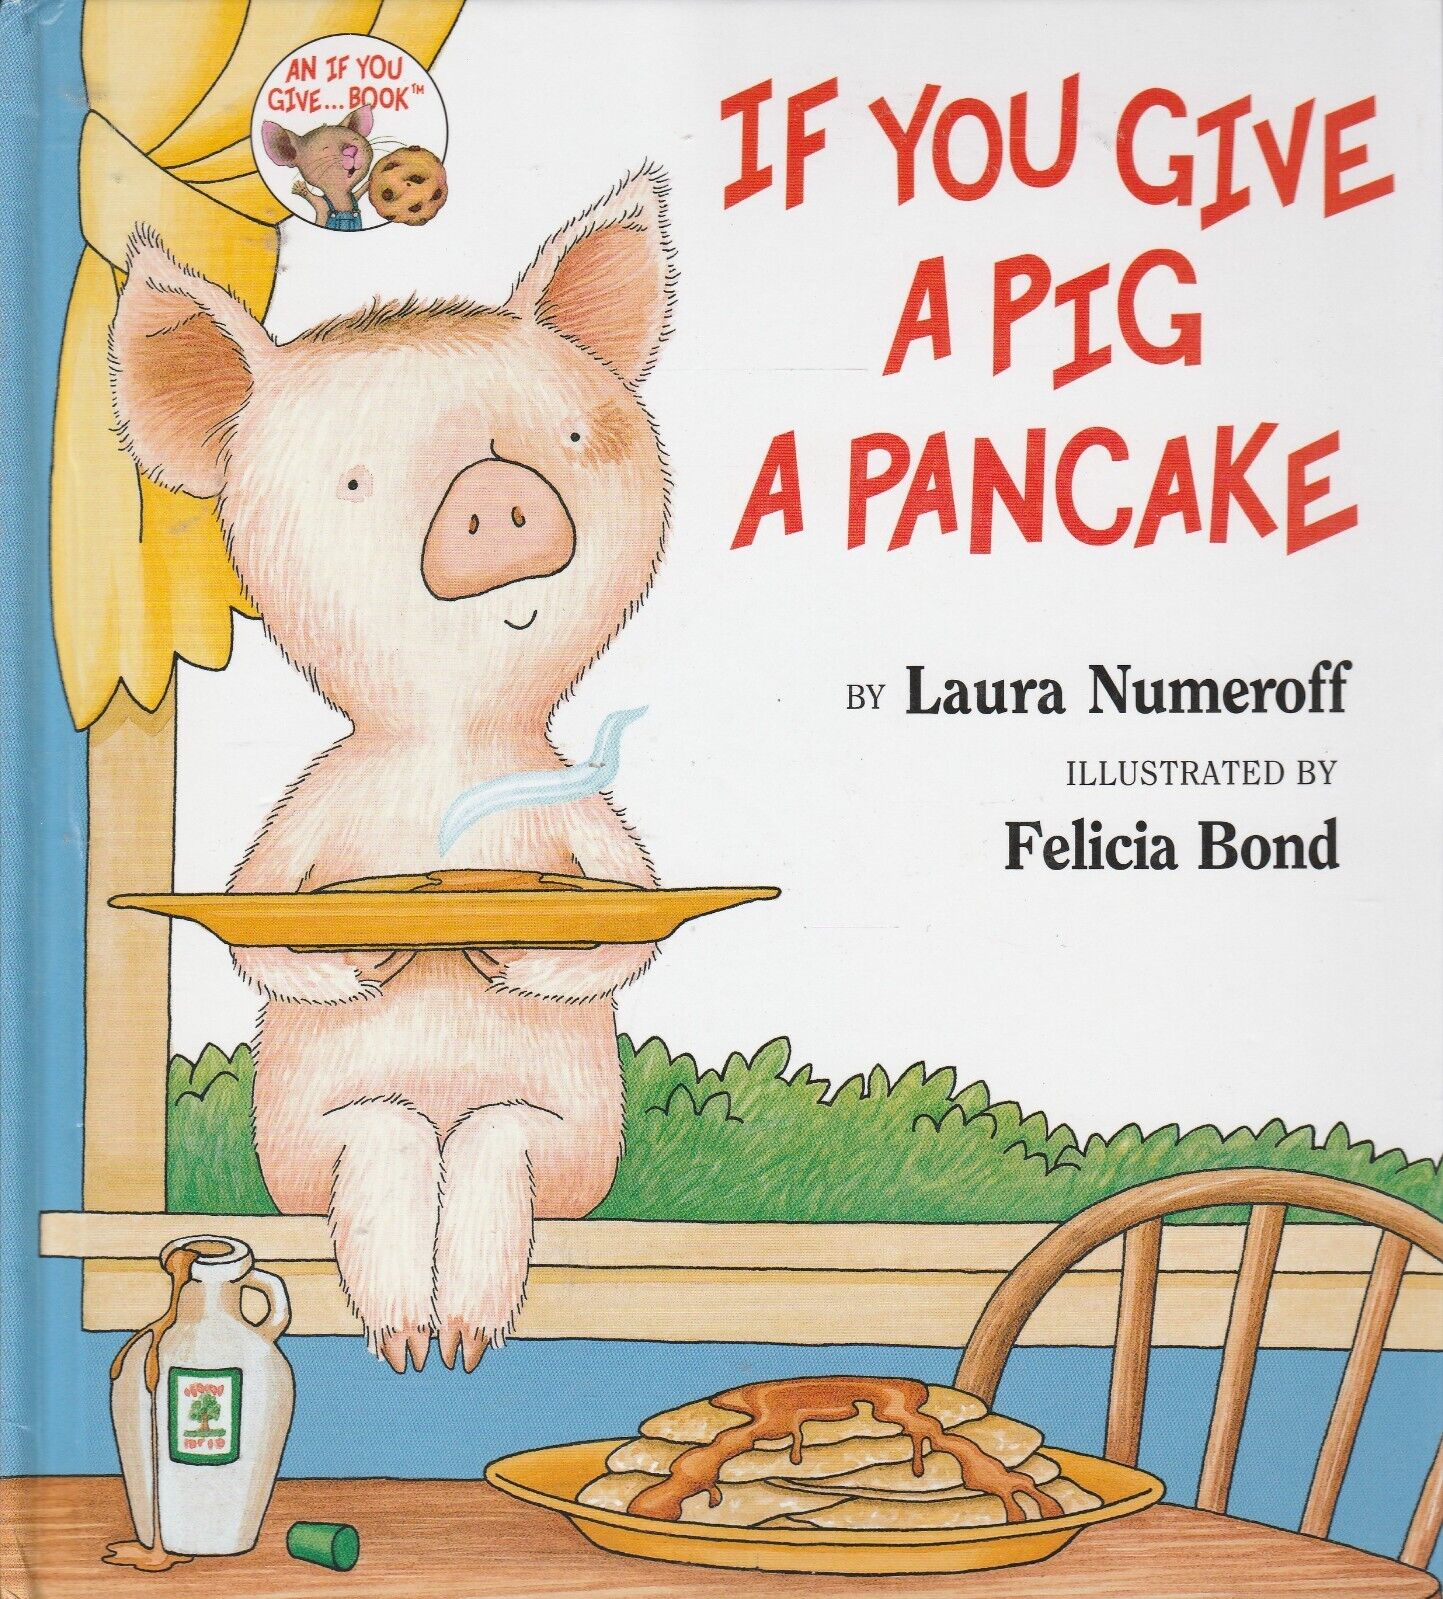 IF YOU GIVE A PIG A PANCAKE